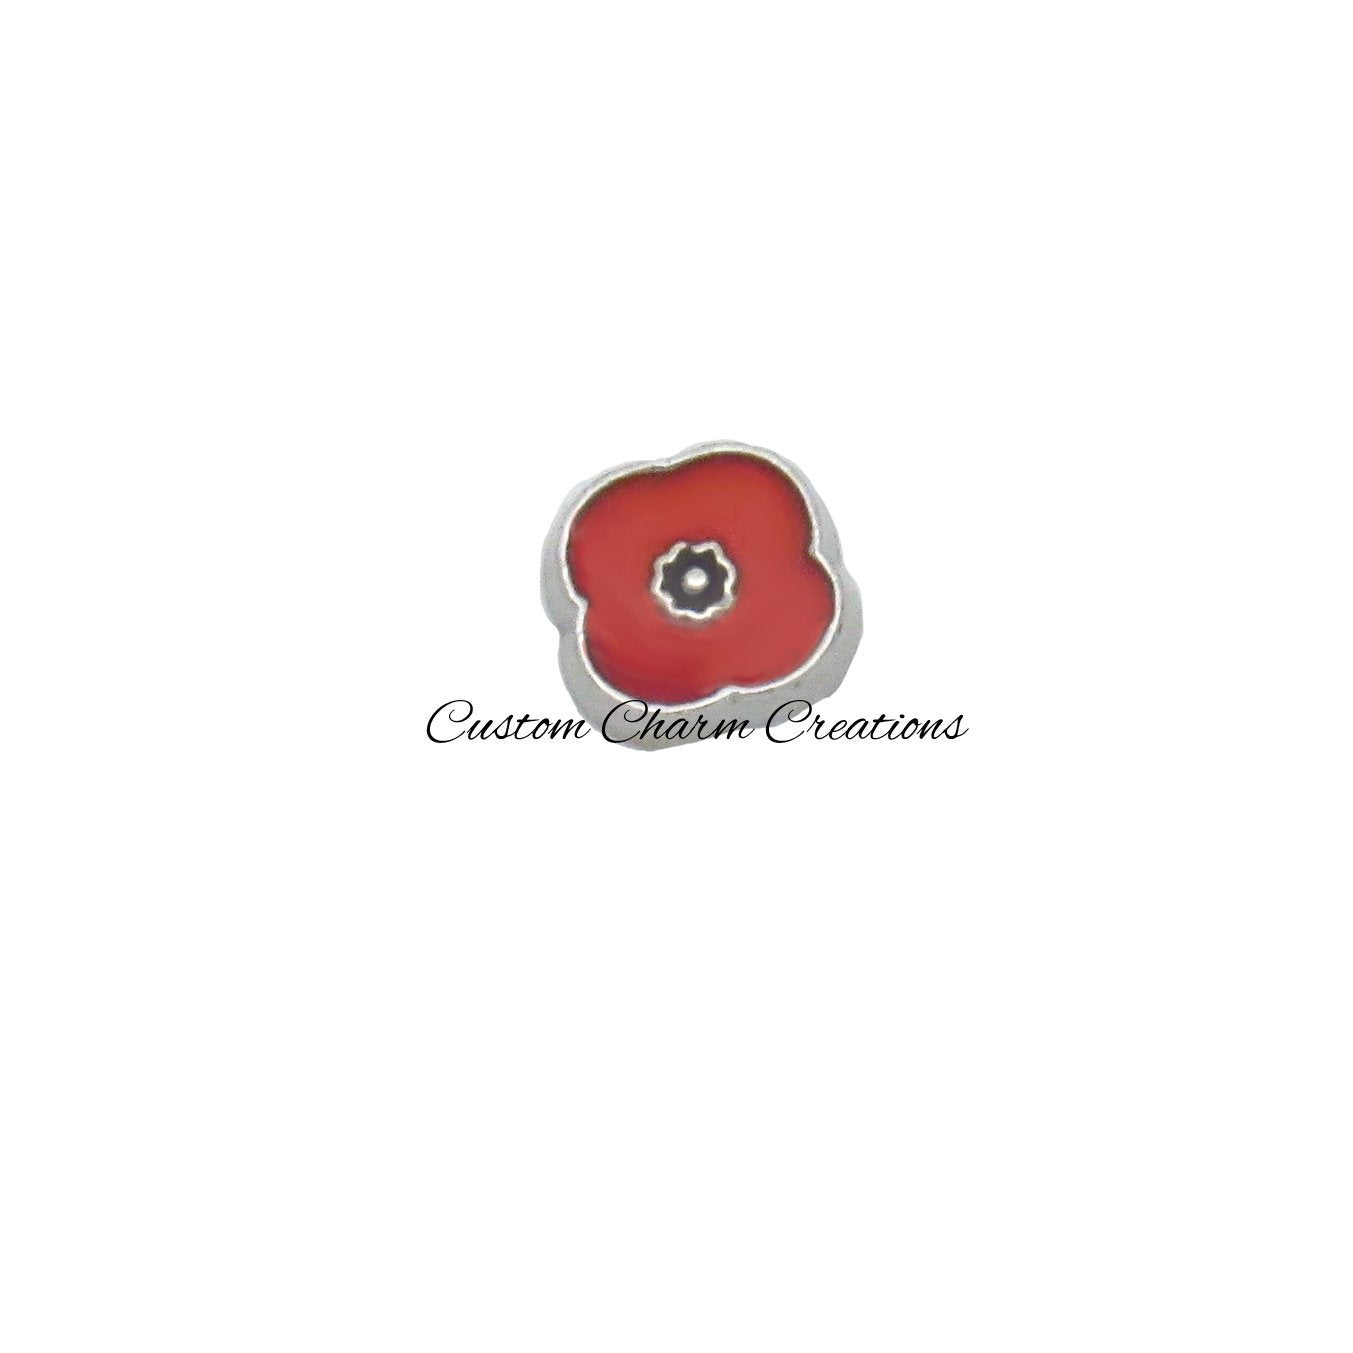 Red Poppy Flower Floating Locket Charm • Remembrance Memory Charm - TRA27 - Custom Charm Creations